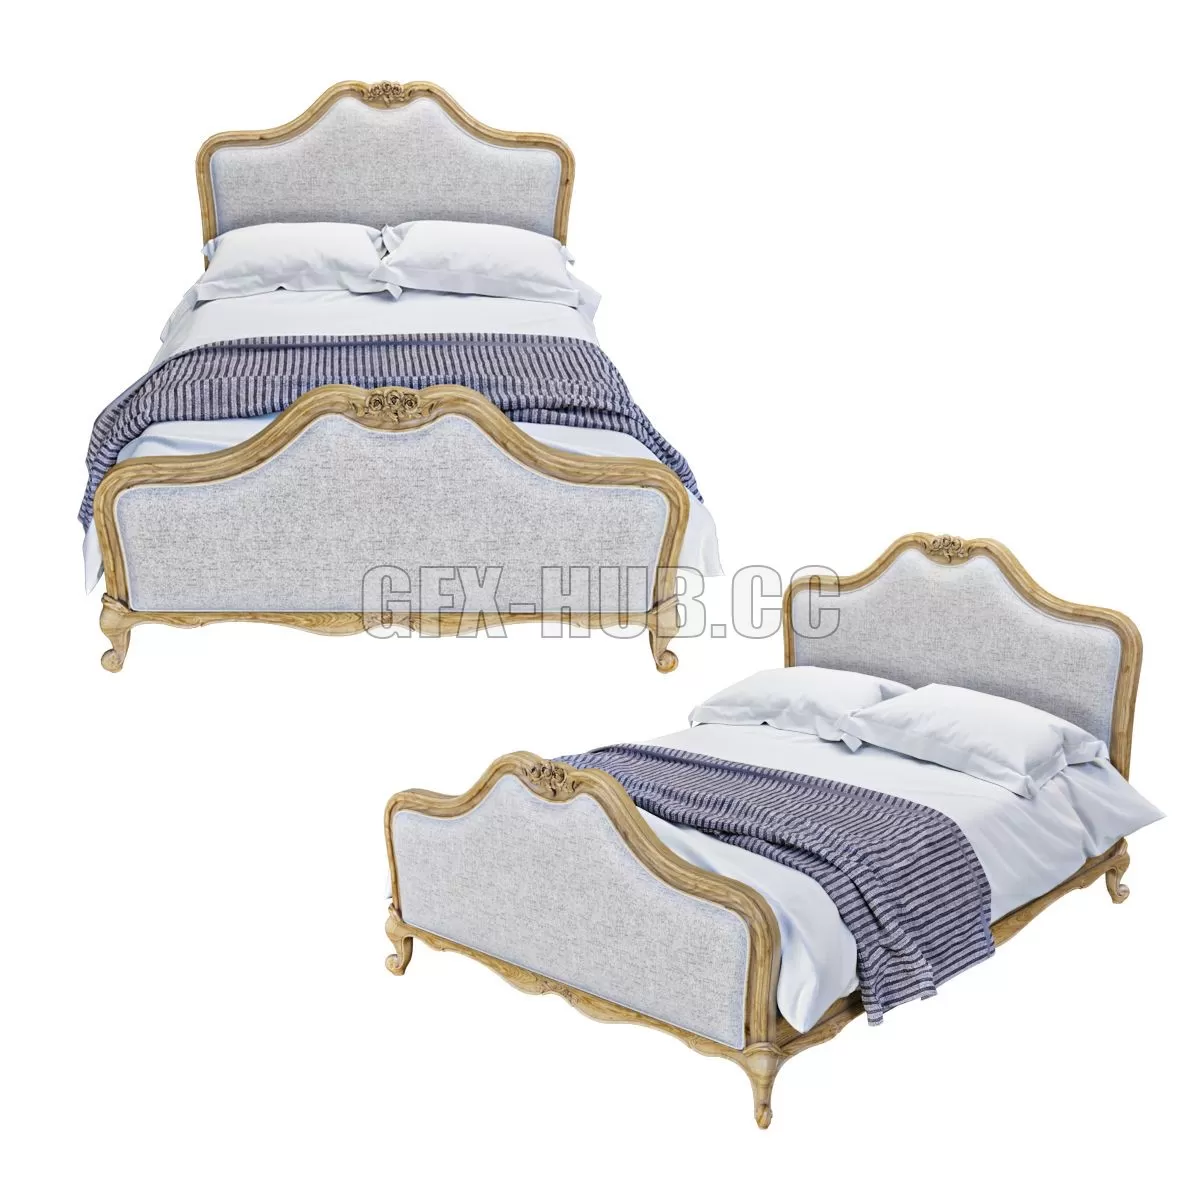 BED – Chic king size bed